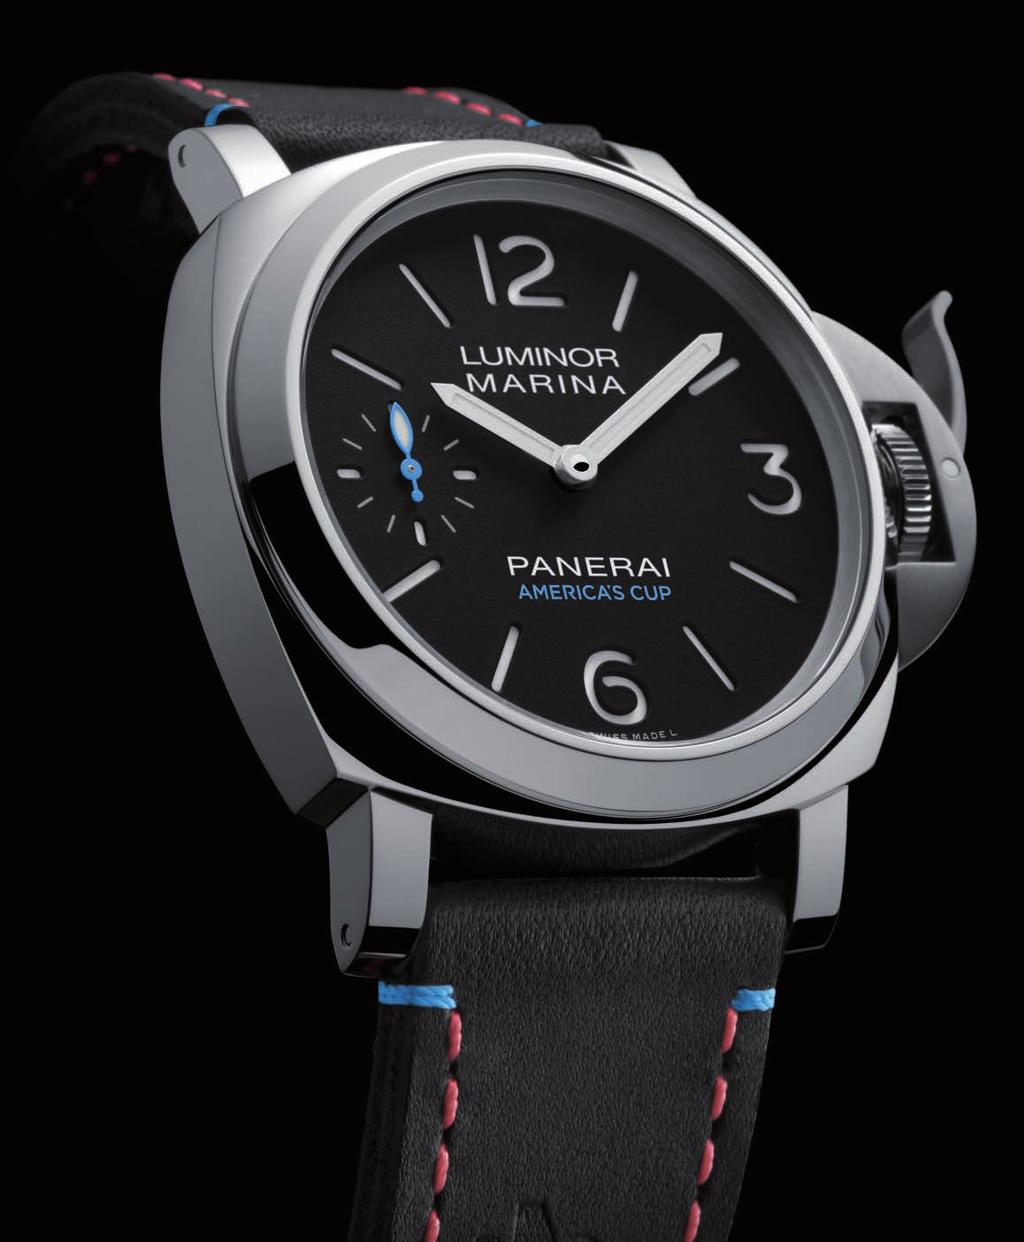 LUMINOR MARINA ORACLE TEAM USA 8 DAYS ACCIAIO 44mm OFFICIAL WATCH OF ORACLE TEAM USA AMONG THE SPECIAL EDITIONS CREATED BY PANERAI AS OFFICIAL WATCHES OF ORACLE TEAM USA FOR THE 2017 AMERICA S CUP IS